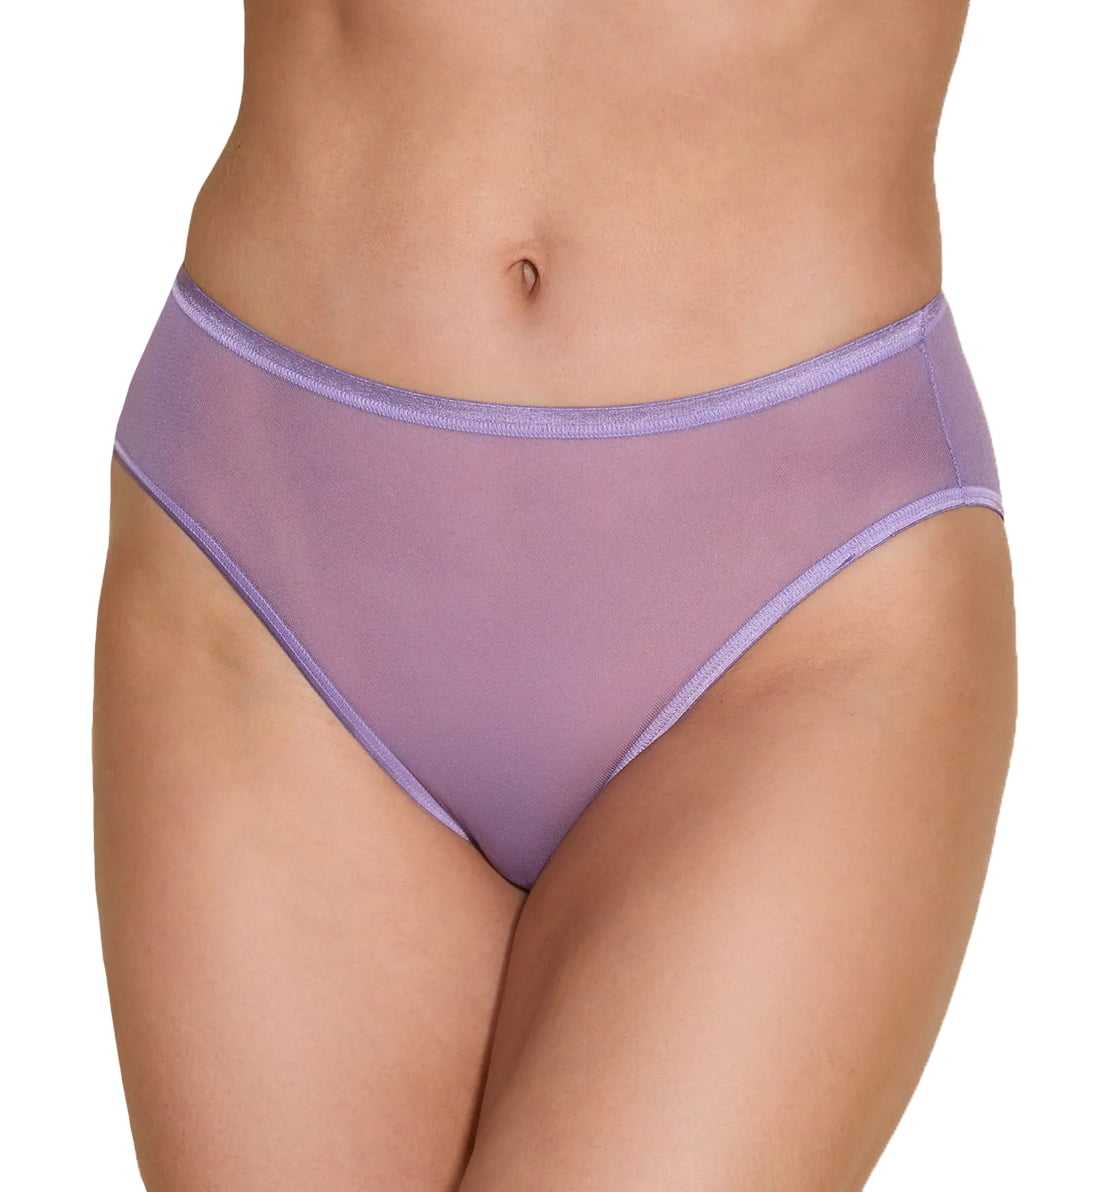 Cosabella Soire Confidence High Waist Brief Panty  (SOIRC0562),Large,Himalayan Sky 